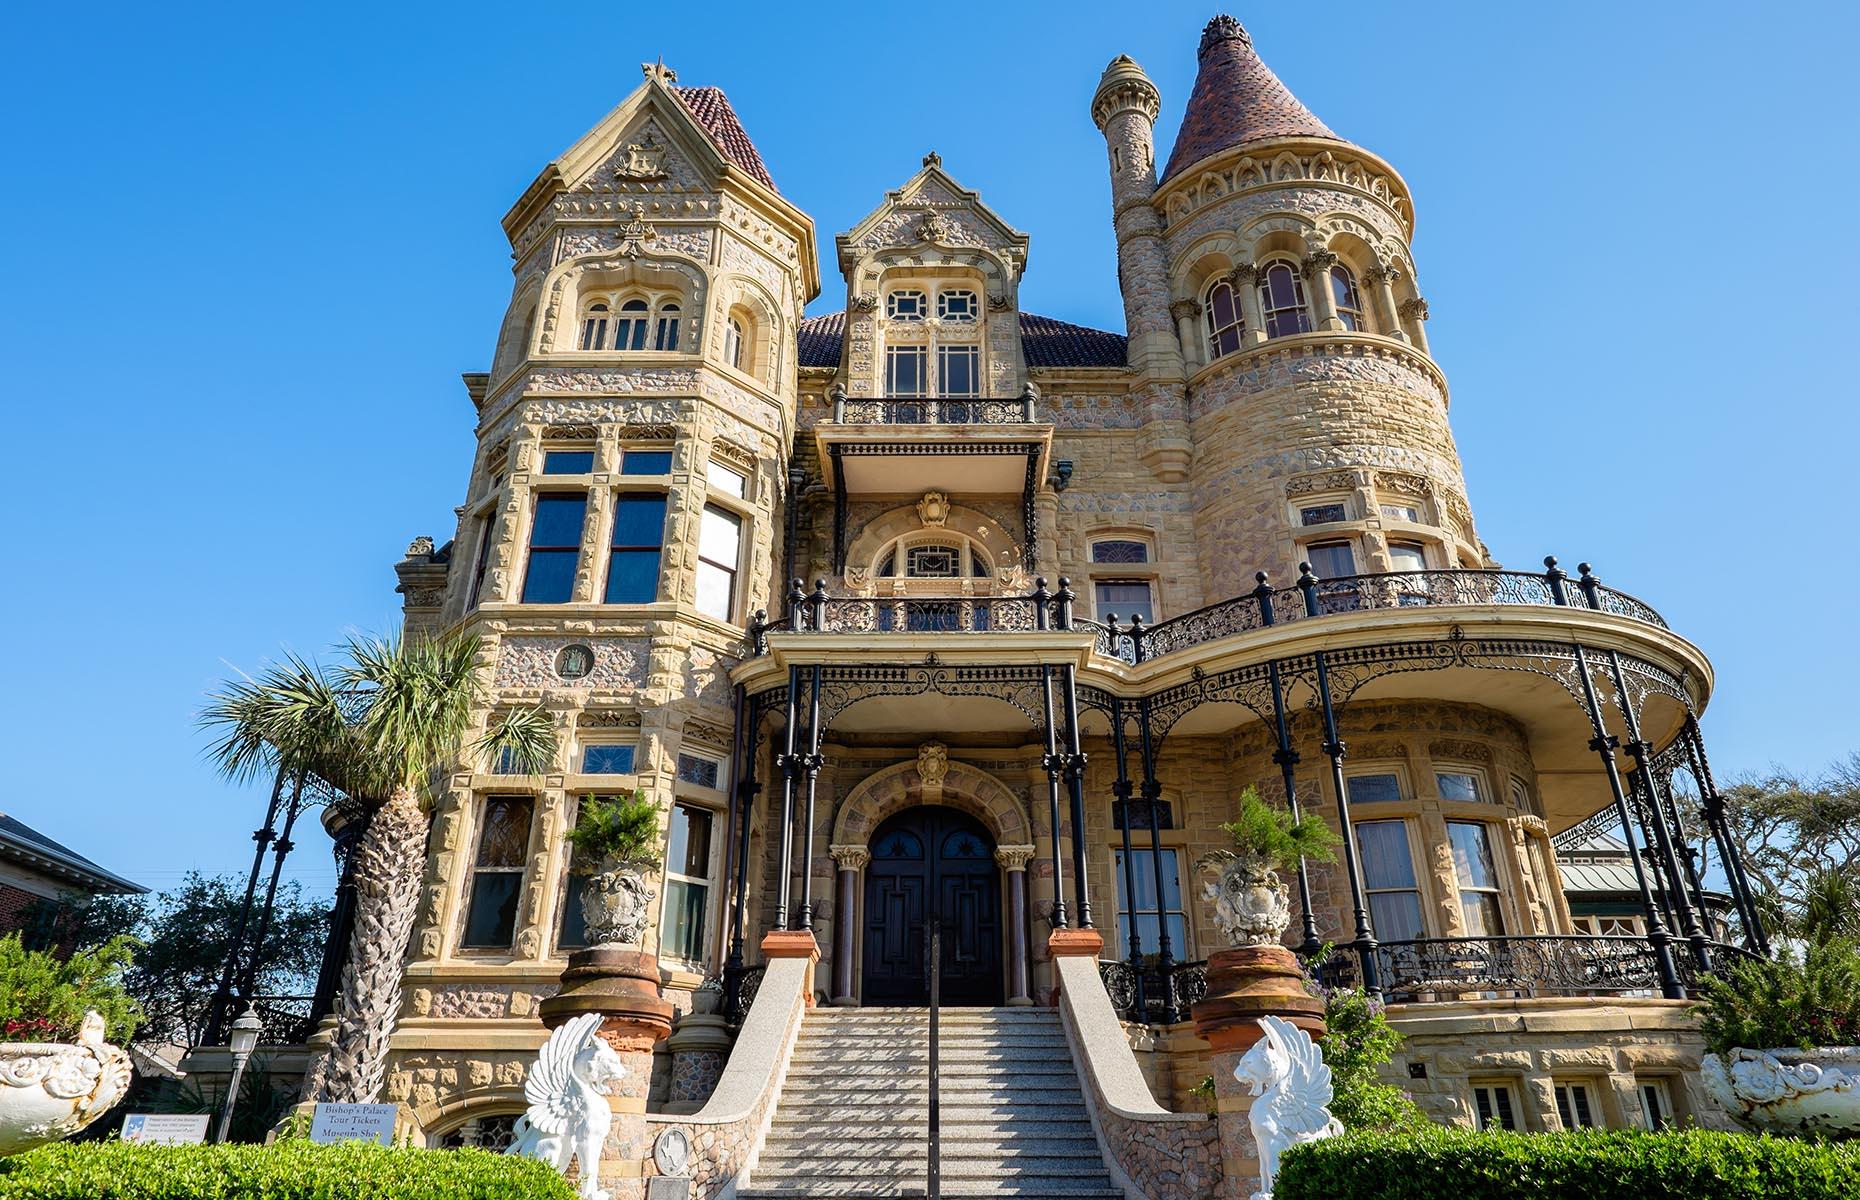 It’s a little small for a palace but this beloved Galveston property is deserving of its name. Built in 1892, it's an impressive example of Victorian architecture, with striking features such as intricate red turrets, gargoyles and bold, circular towers. It was the brainchild of celebrated Galveston architect Nicholas Clayton, who built many of the city’s most beautiful buildings.